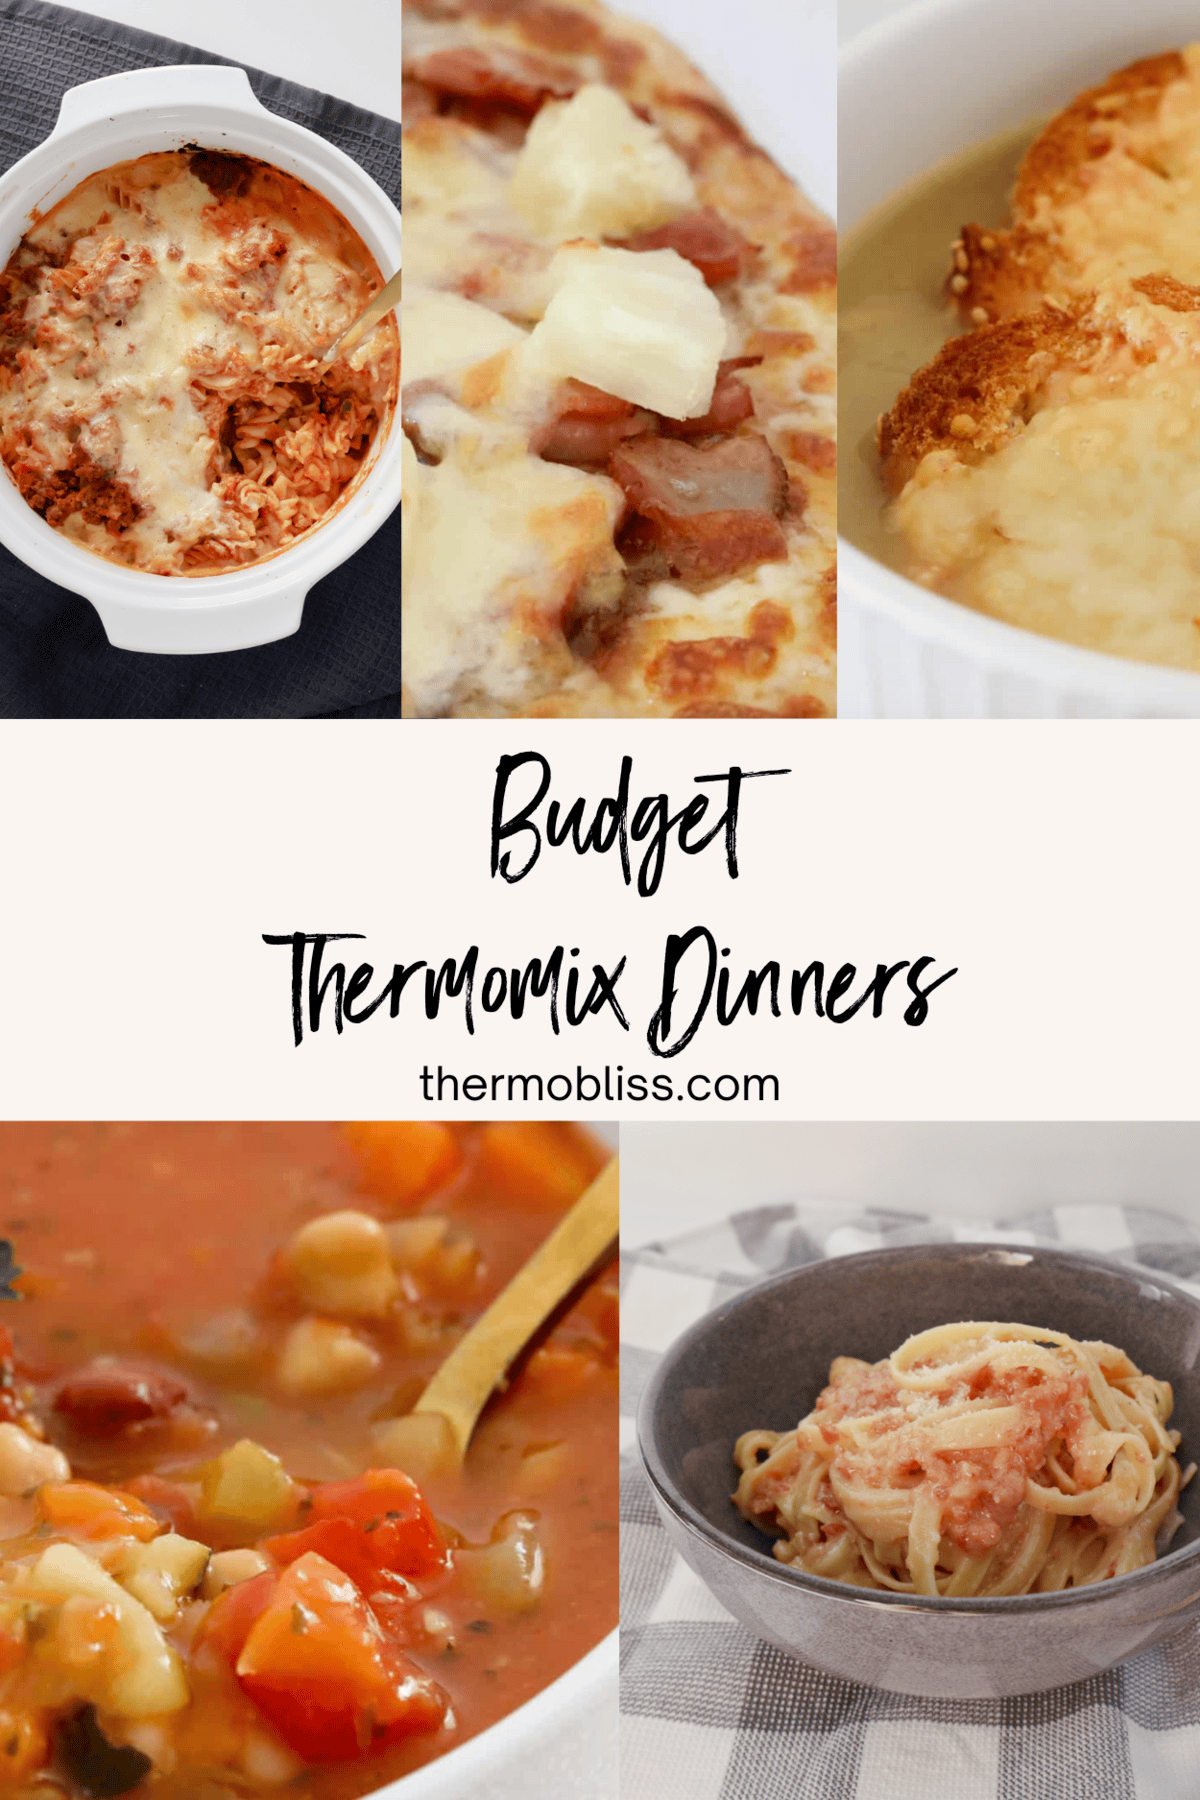 Collage of five images of budget Thermomix Dinners.